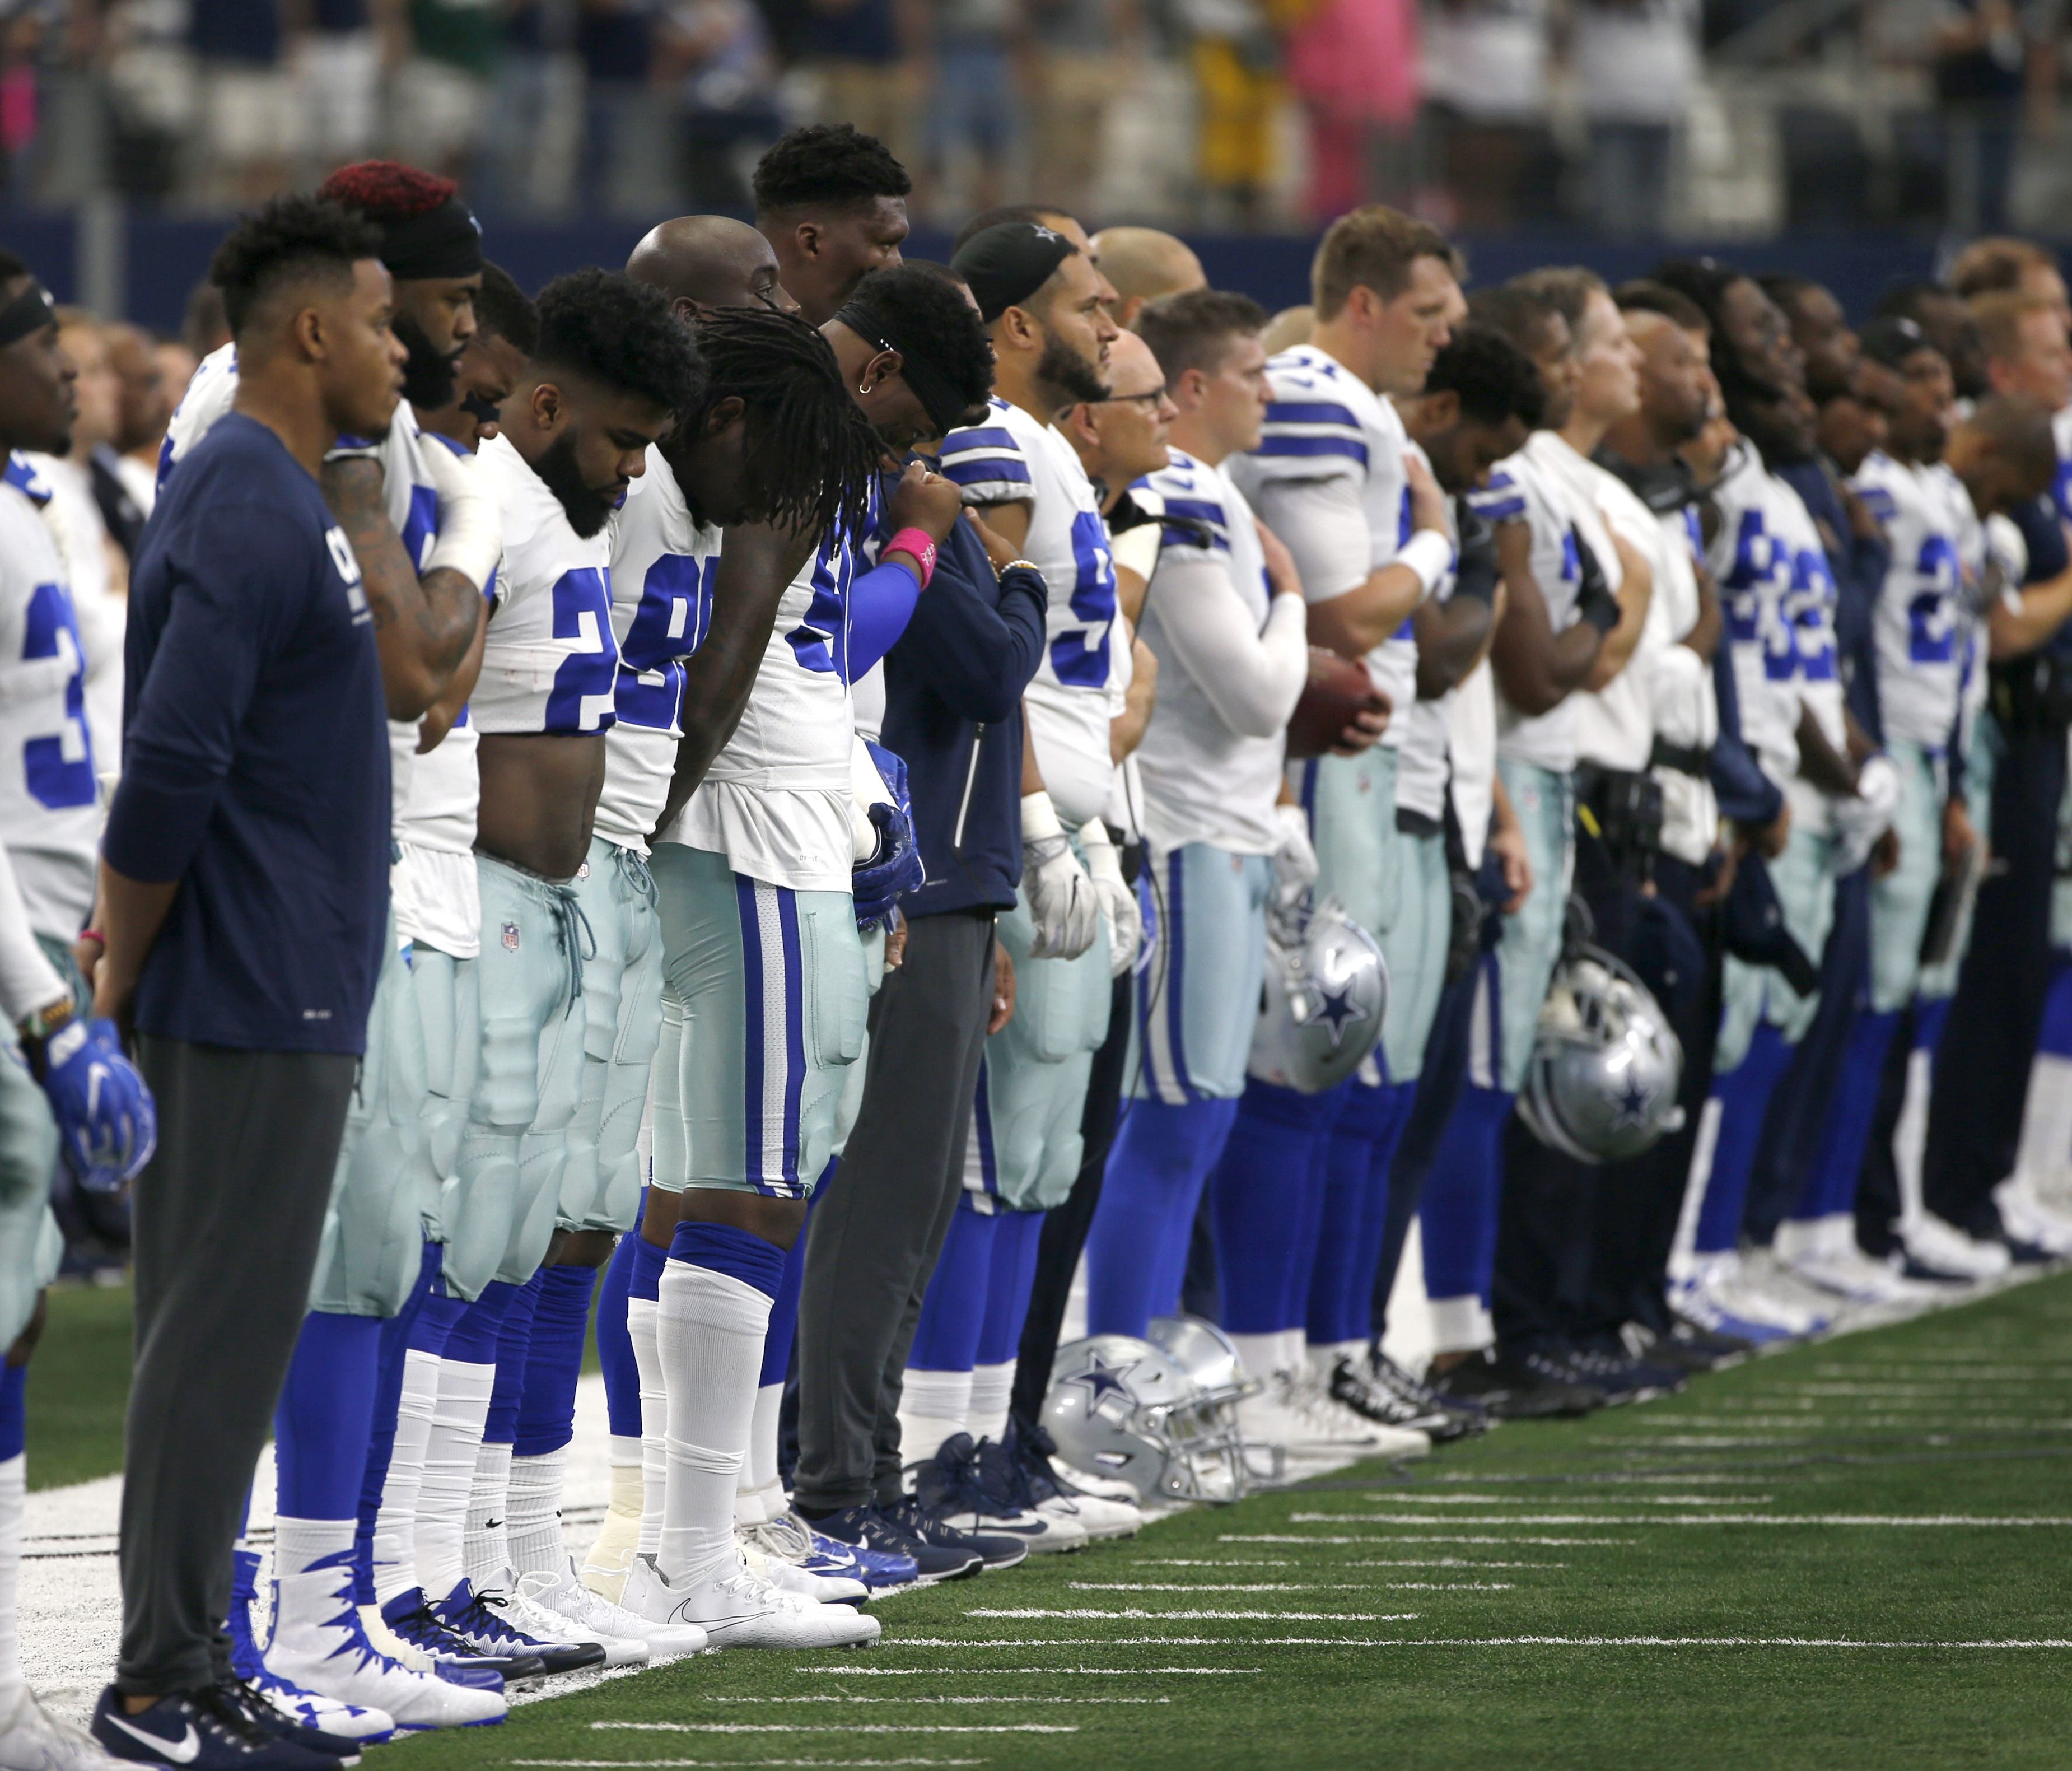 The Dallas Cowboys and staff stand on the sideline during the playing of the national anthem before the first half of an NFL football game against the Green Bay Packers on Sunday, Oct. 8, 2017, in Arlington, Texas.